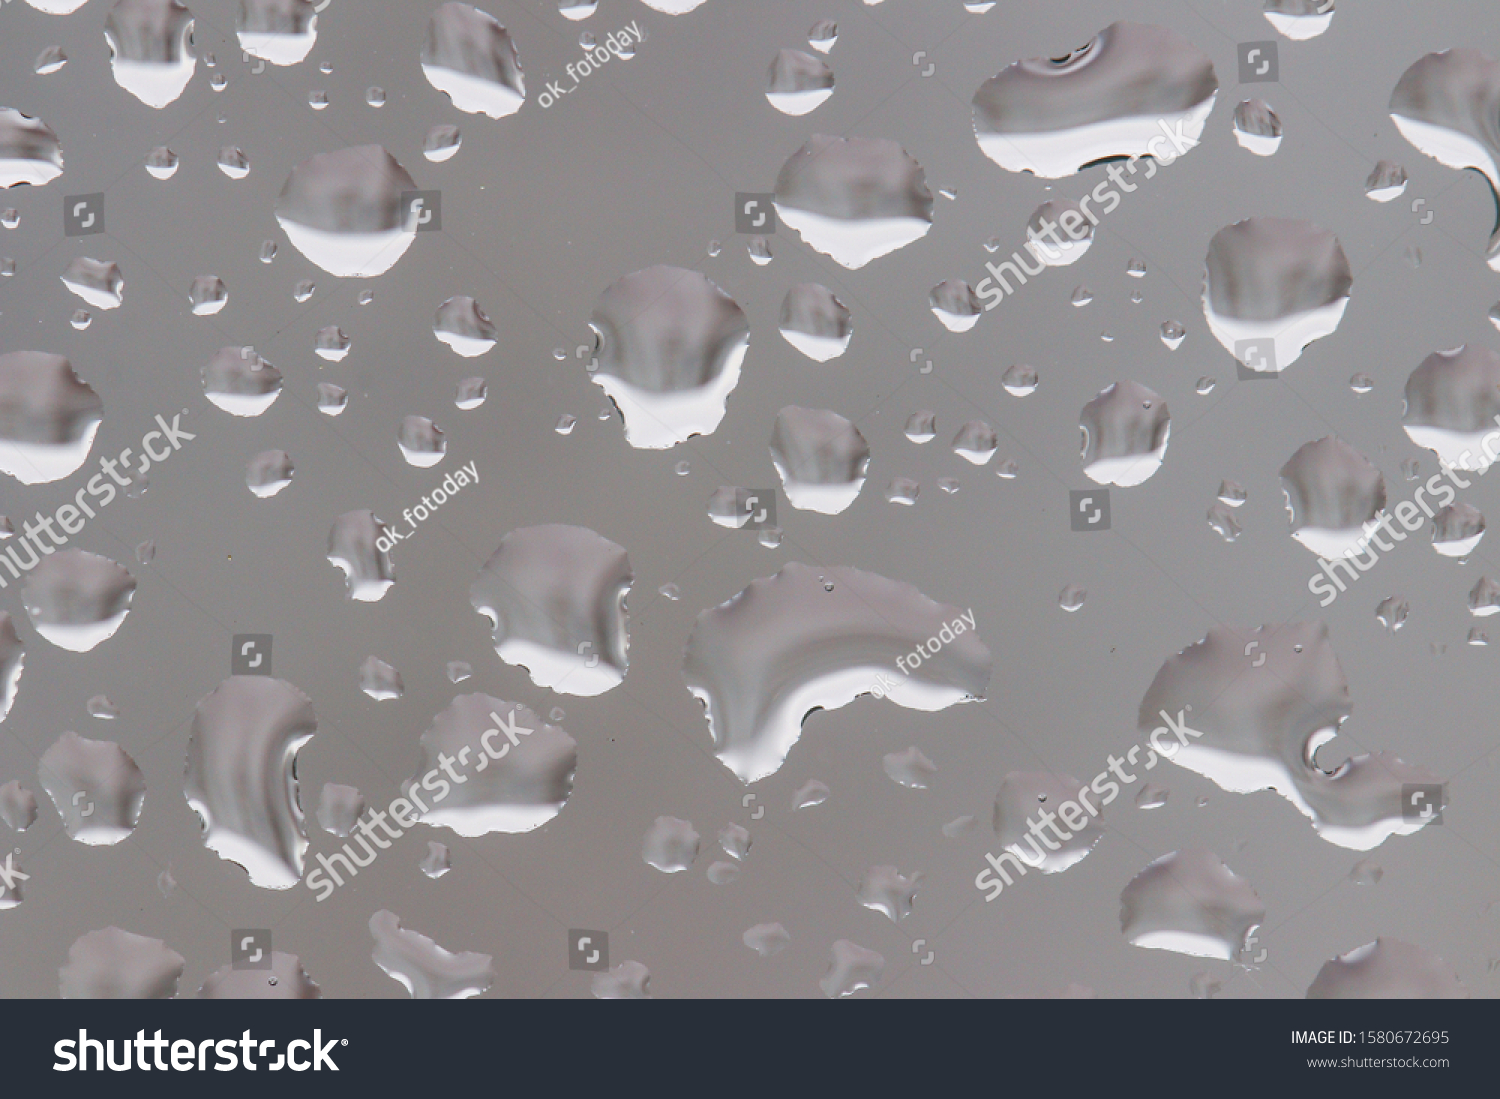 Rain drops on the window, background with drops on the glass #1580672695